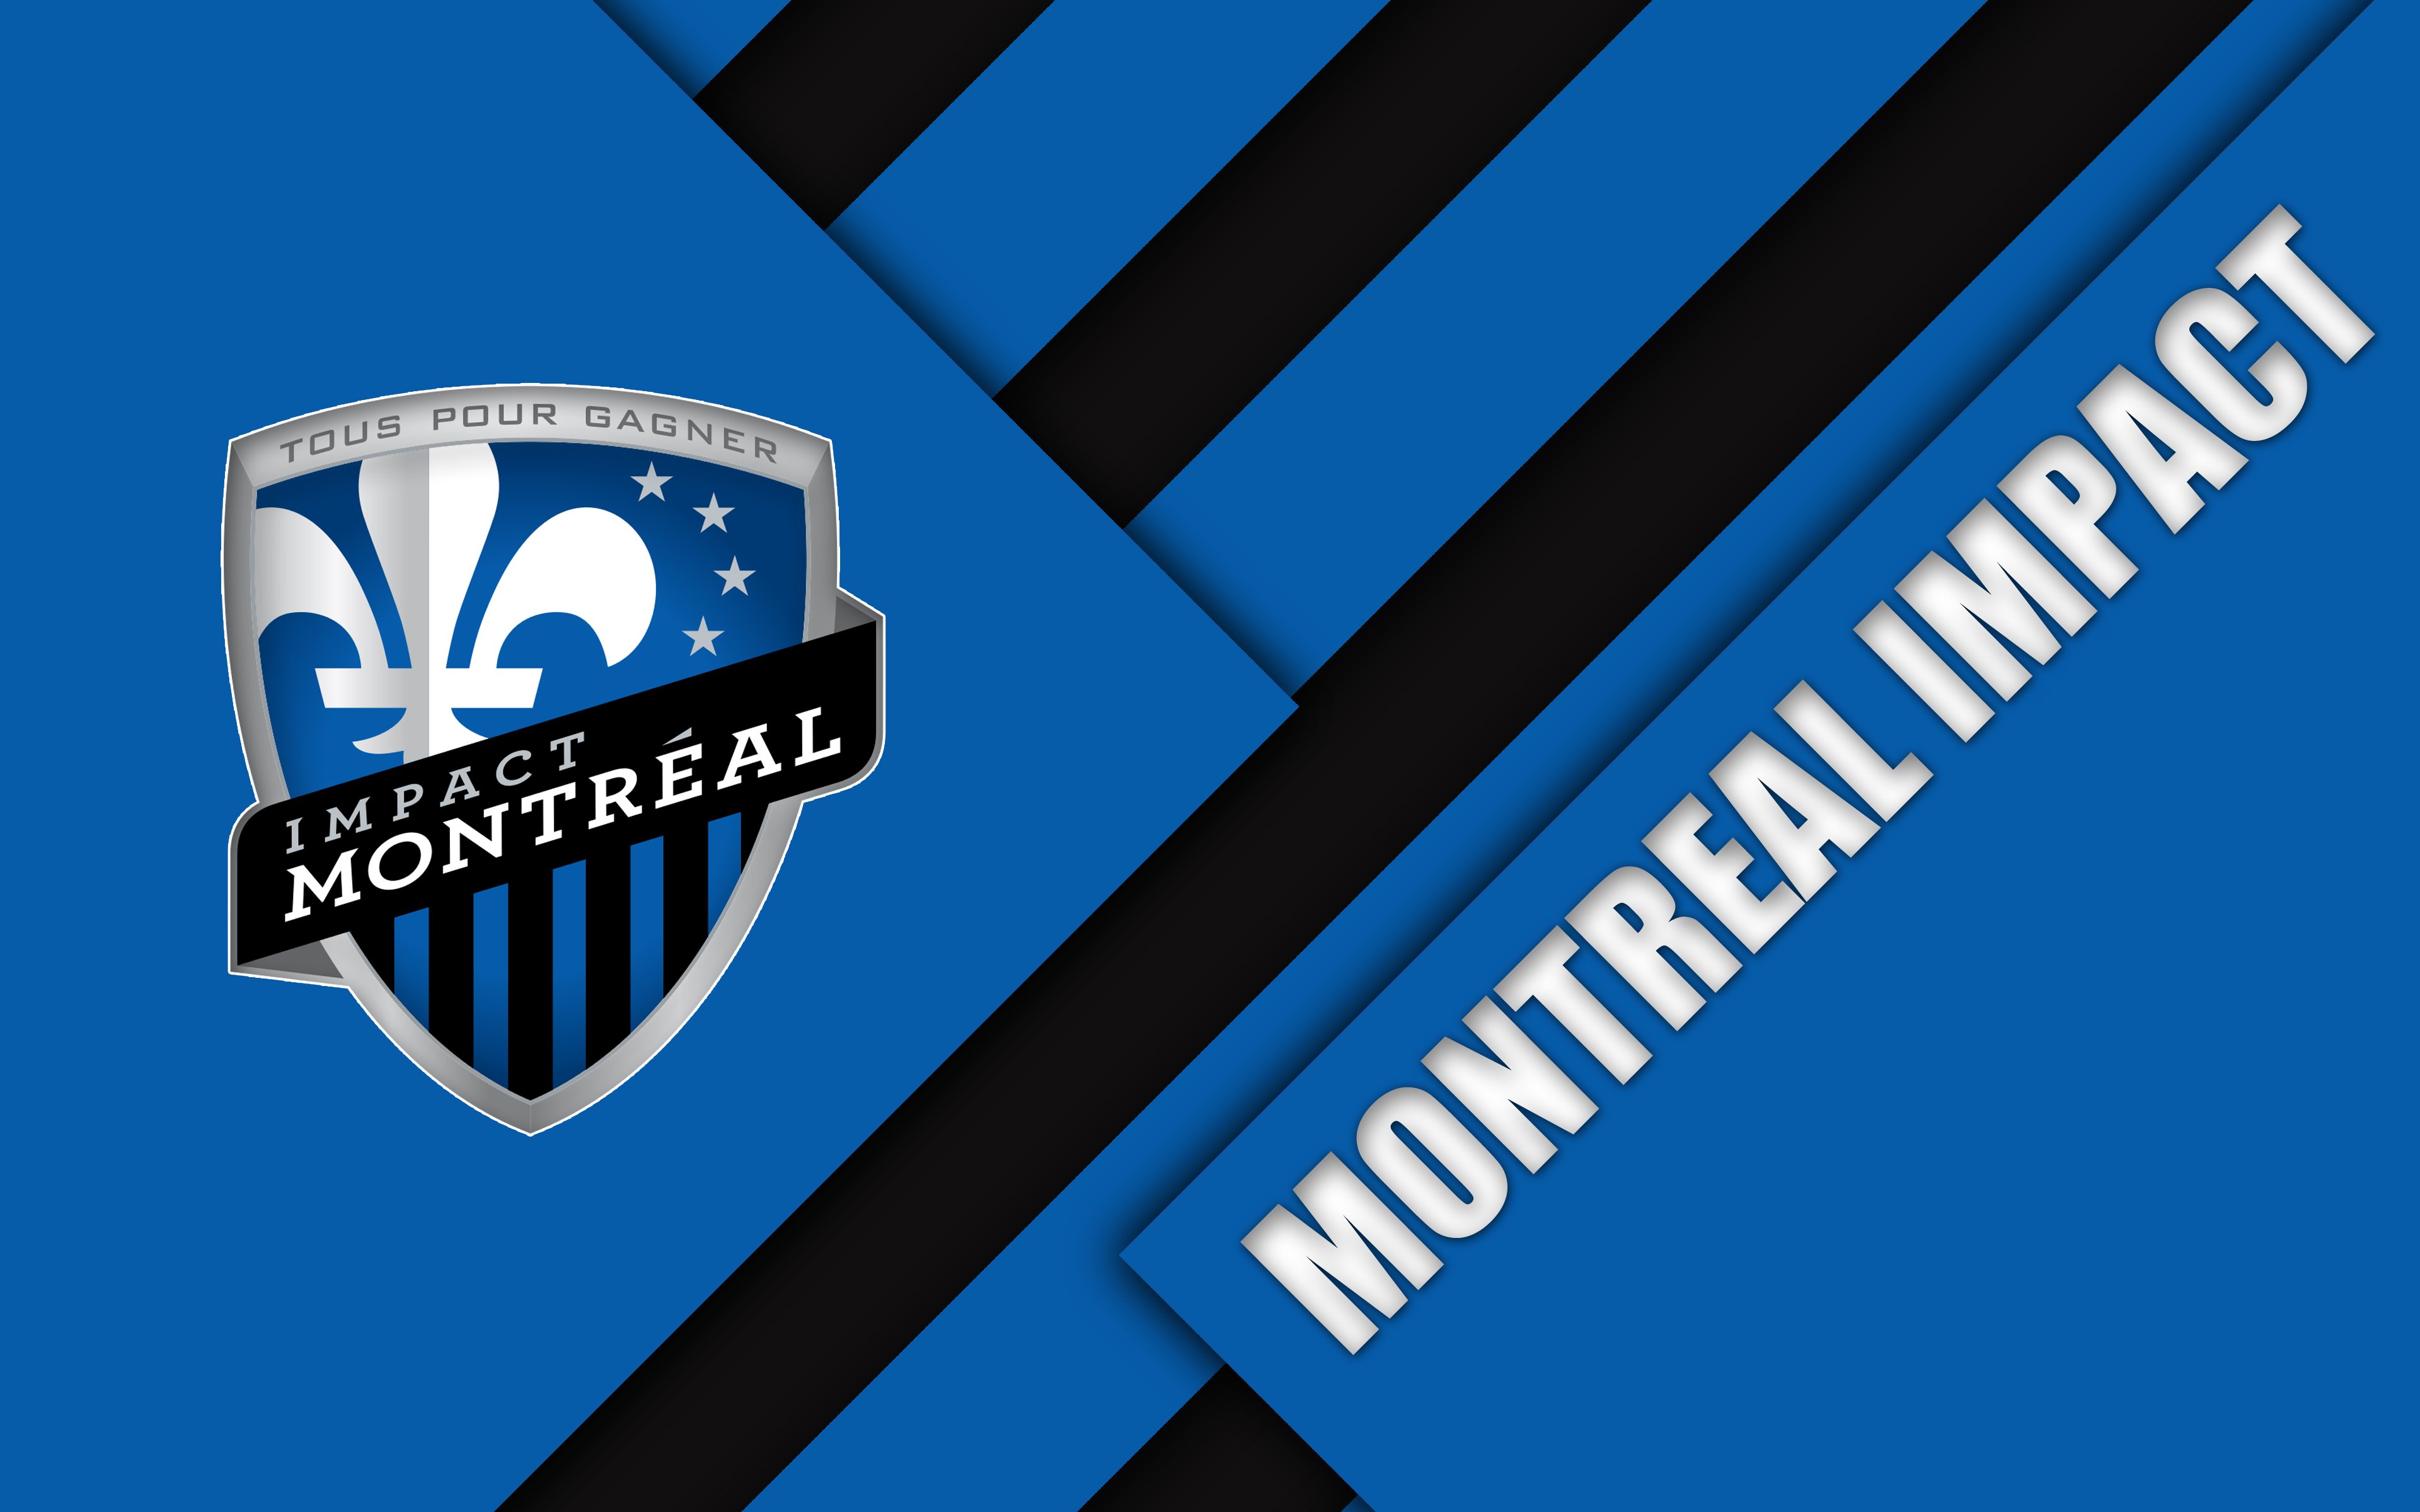 Montreal Impact 4k Ultra HD Wallpaper. Background Imagex2400